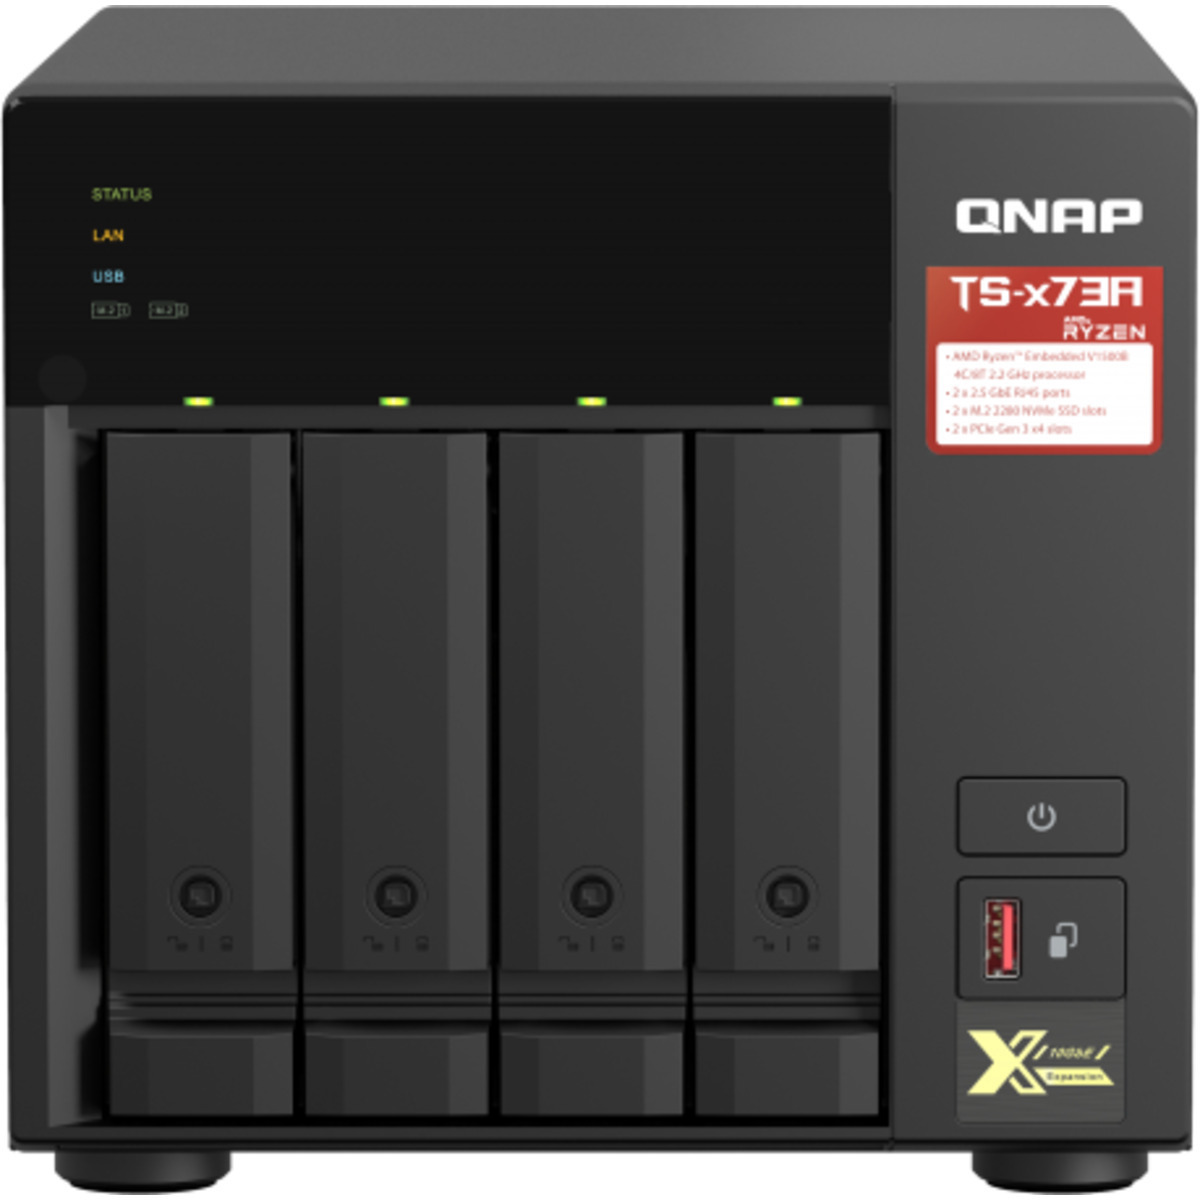 QNAP TS-473A 32tb 4-Bay Desktop Multimedia / Power User / Business NAS - Network Attached Storage Device 4x8tb Seagate IronWolf Pro ST8000NT001 3.5 7200rpm SATA 6Gb/s HDD NAS Class Drives Installed - Burn-In Tested - ON SALE TS-473A